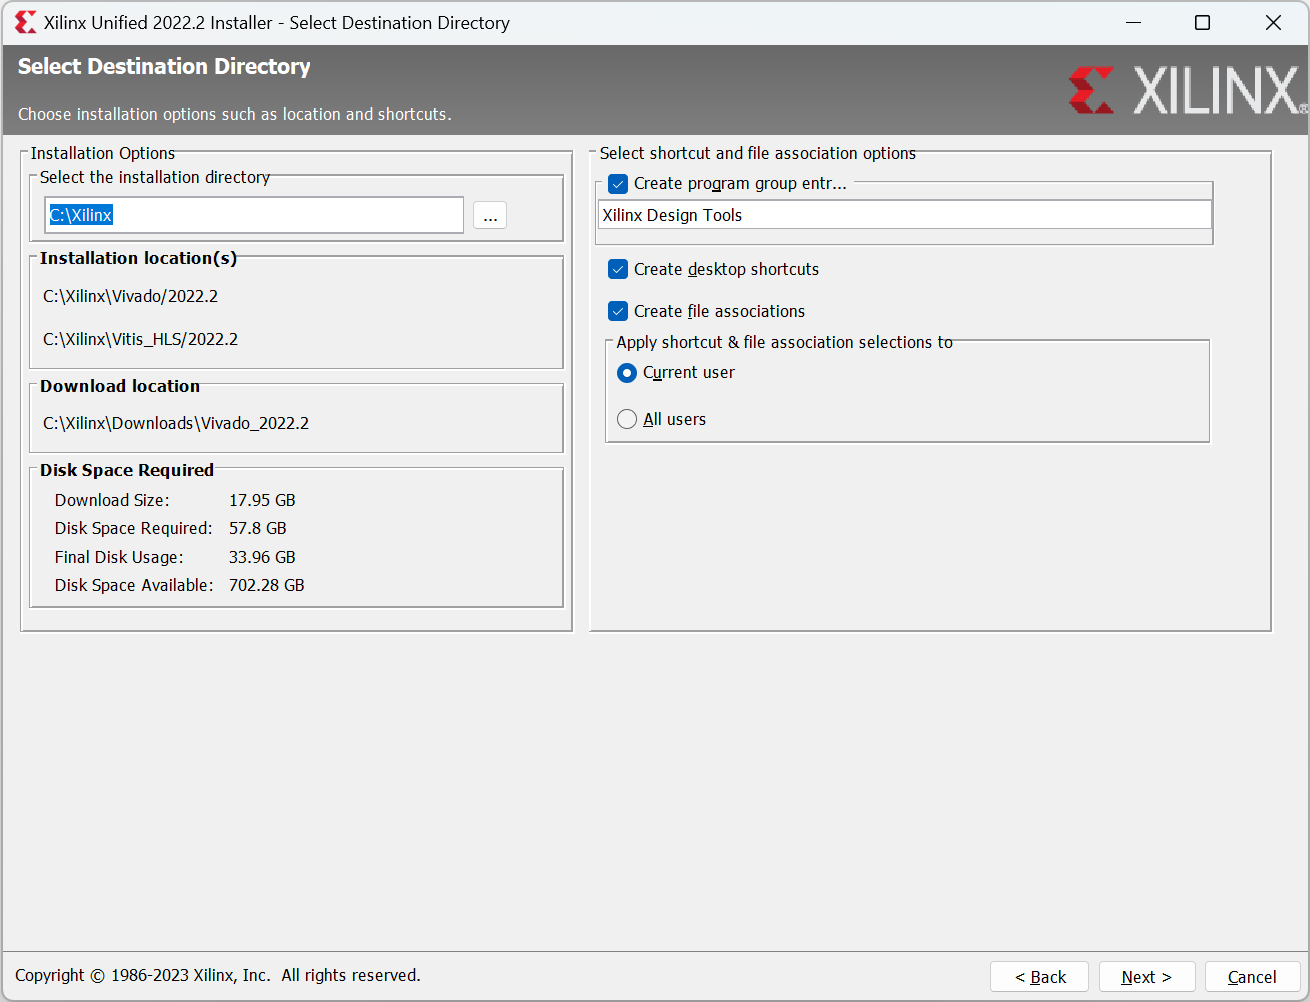 Xilinx Unified Installer "Select Destination Directory" Page Screenshot